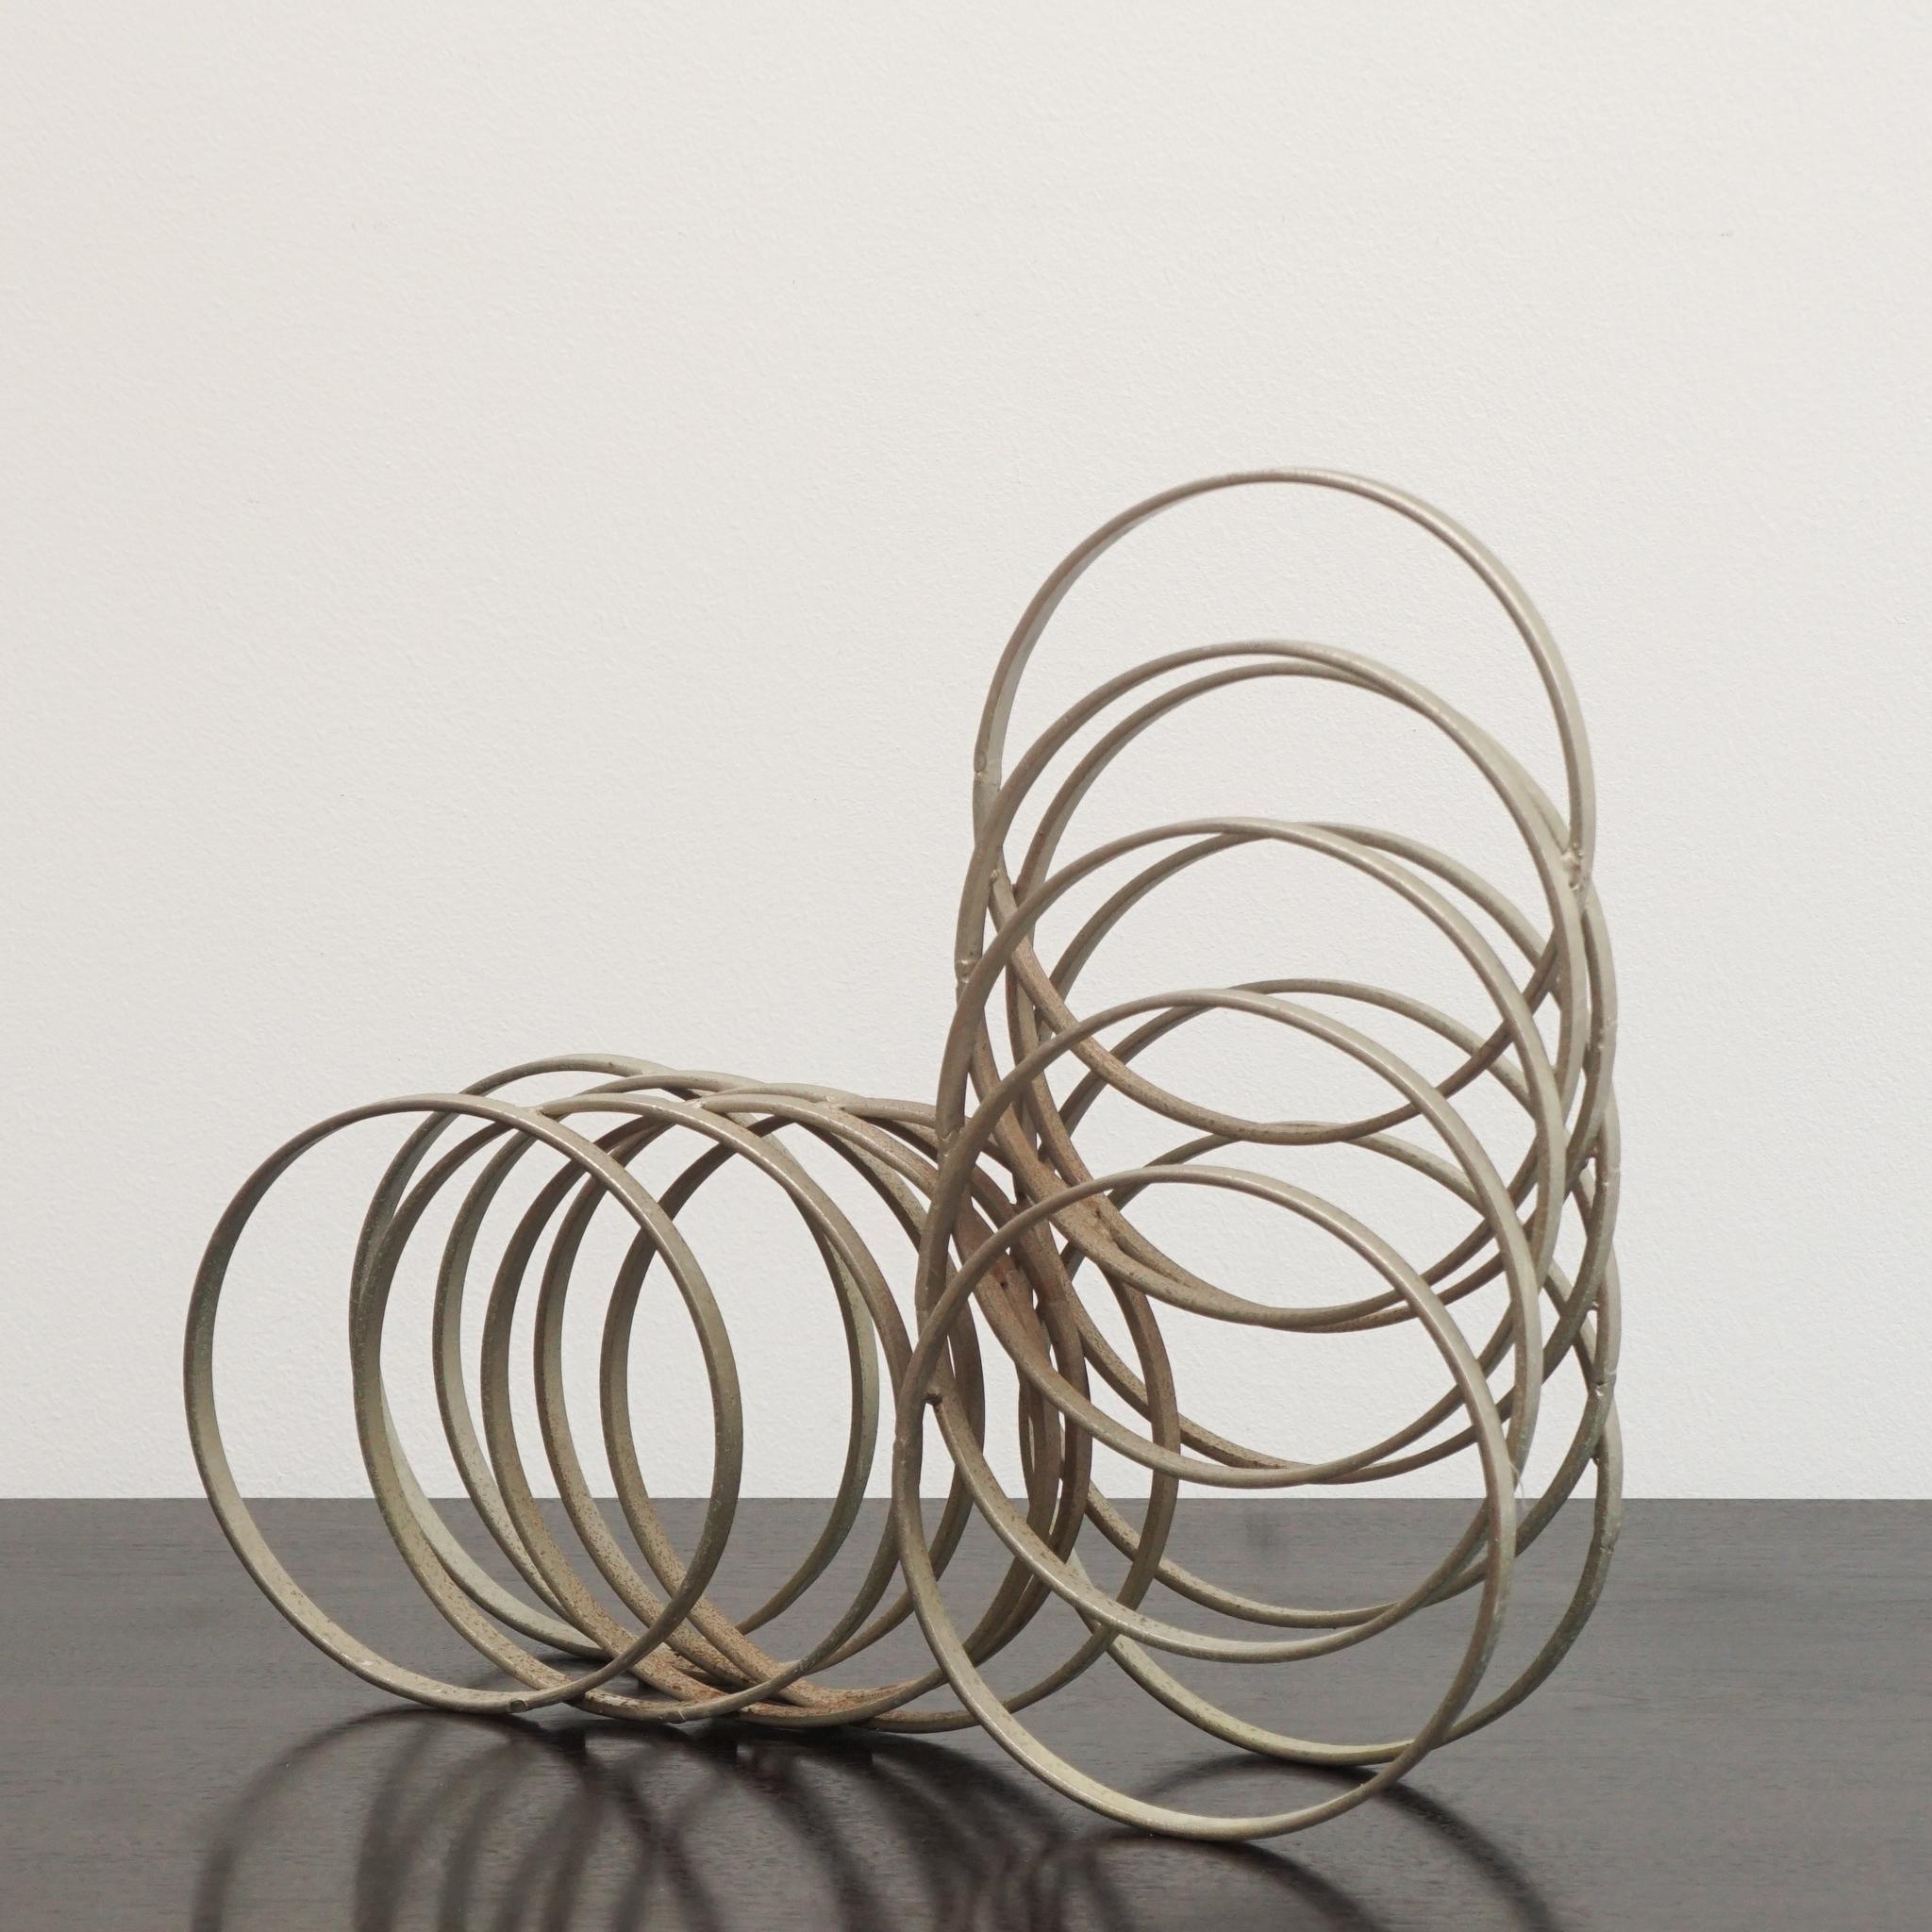 Metal rings were used to create the unusual stepped sculpture, shown here, from Italy c. 1970s.   Arranged in ascending and descending order, the coils are soldered in place to create a free-standing vertical or horizontal work of art.  